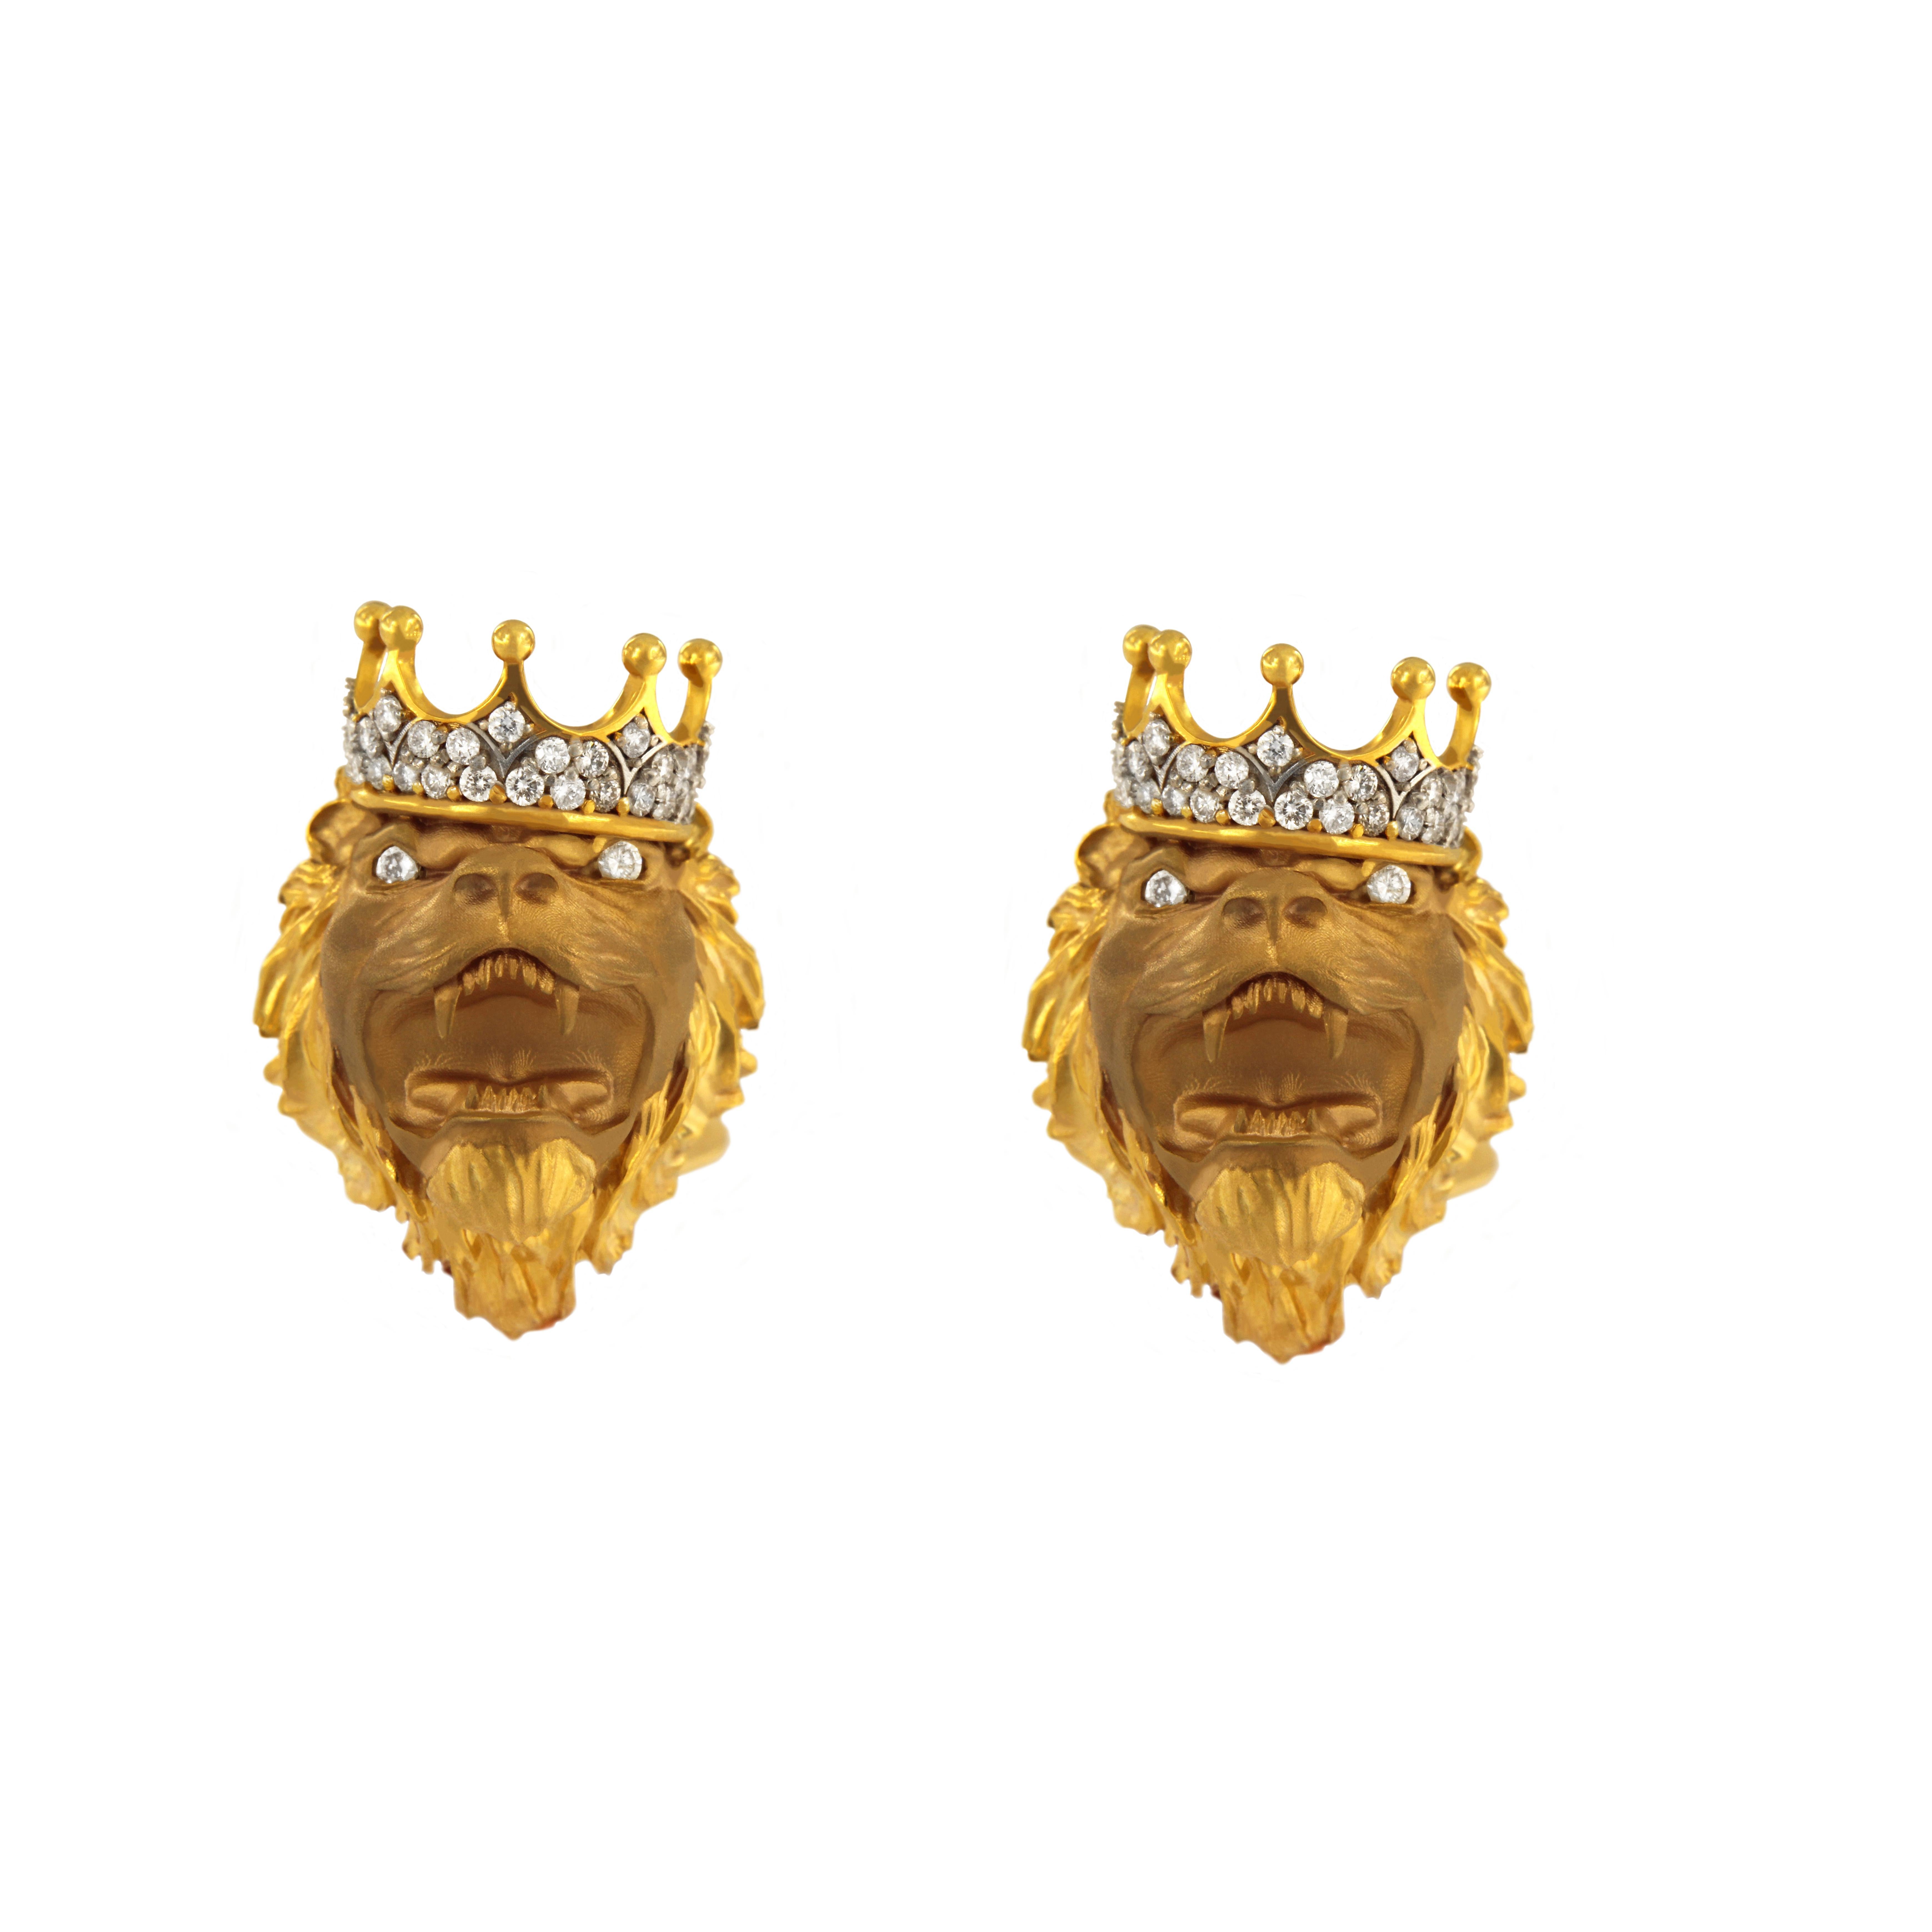 Unique Gold & Diamond Lion Cufflinks In New Condition For Sale In New York, NY